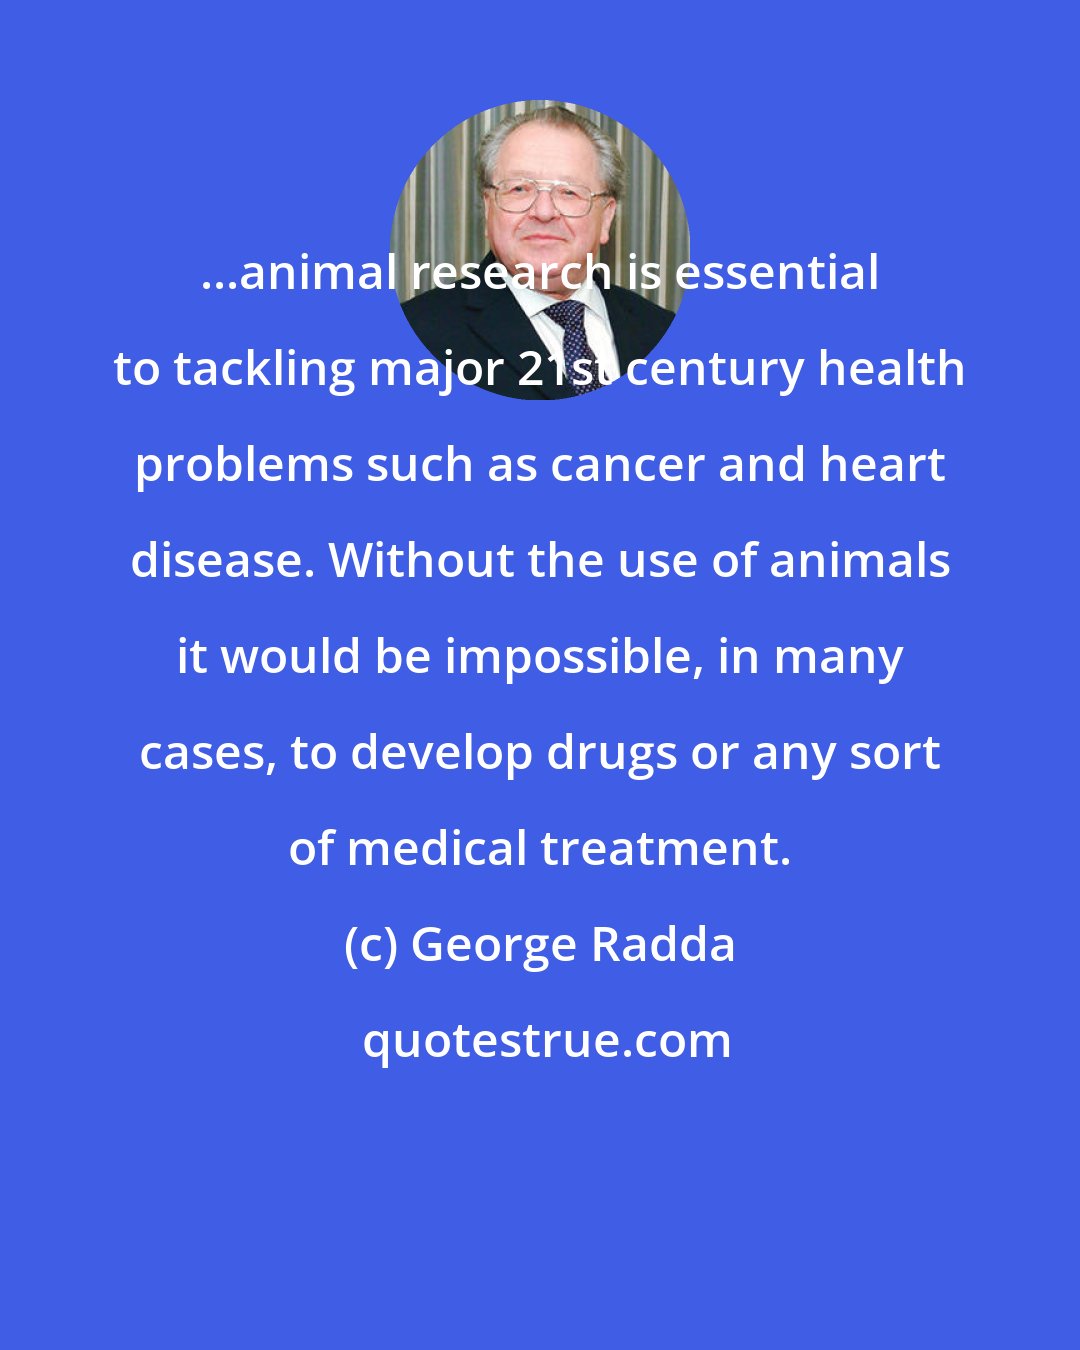 George Radda: ...animal research is essential to tackling major 21st century health problems such as cancer and heart disease. Without the use of animals it would be impossible, in many cases, to develop drugs or any sort of medical treatment.